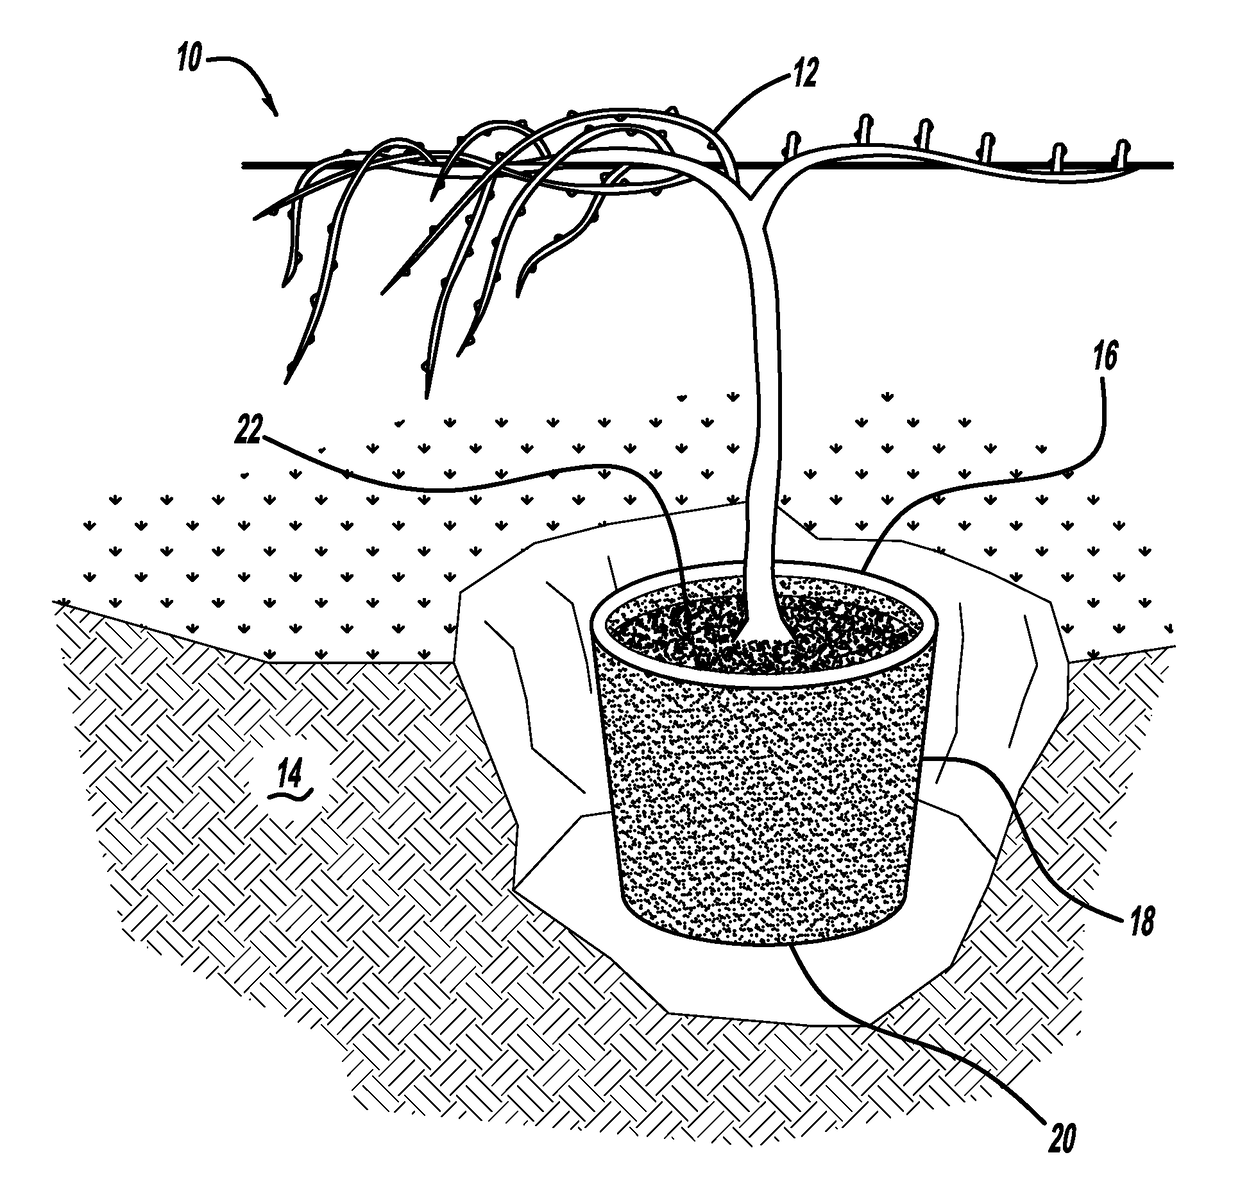 Method of growing grapevines